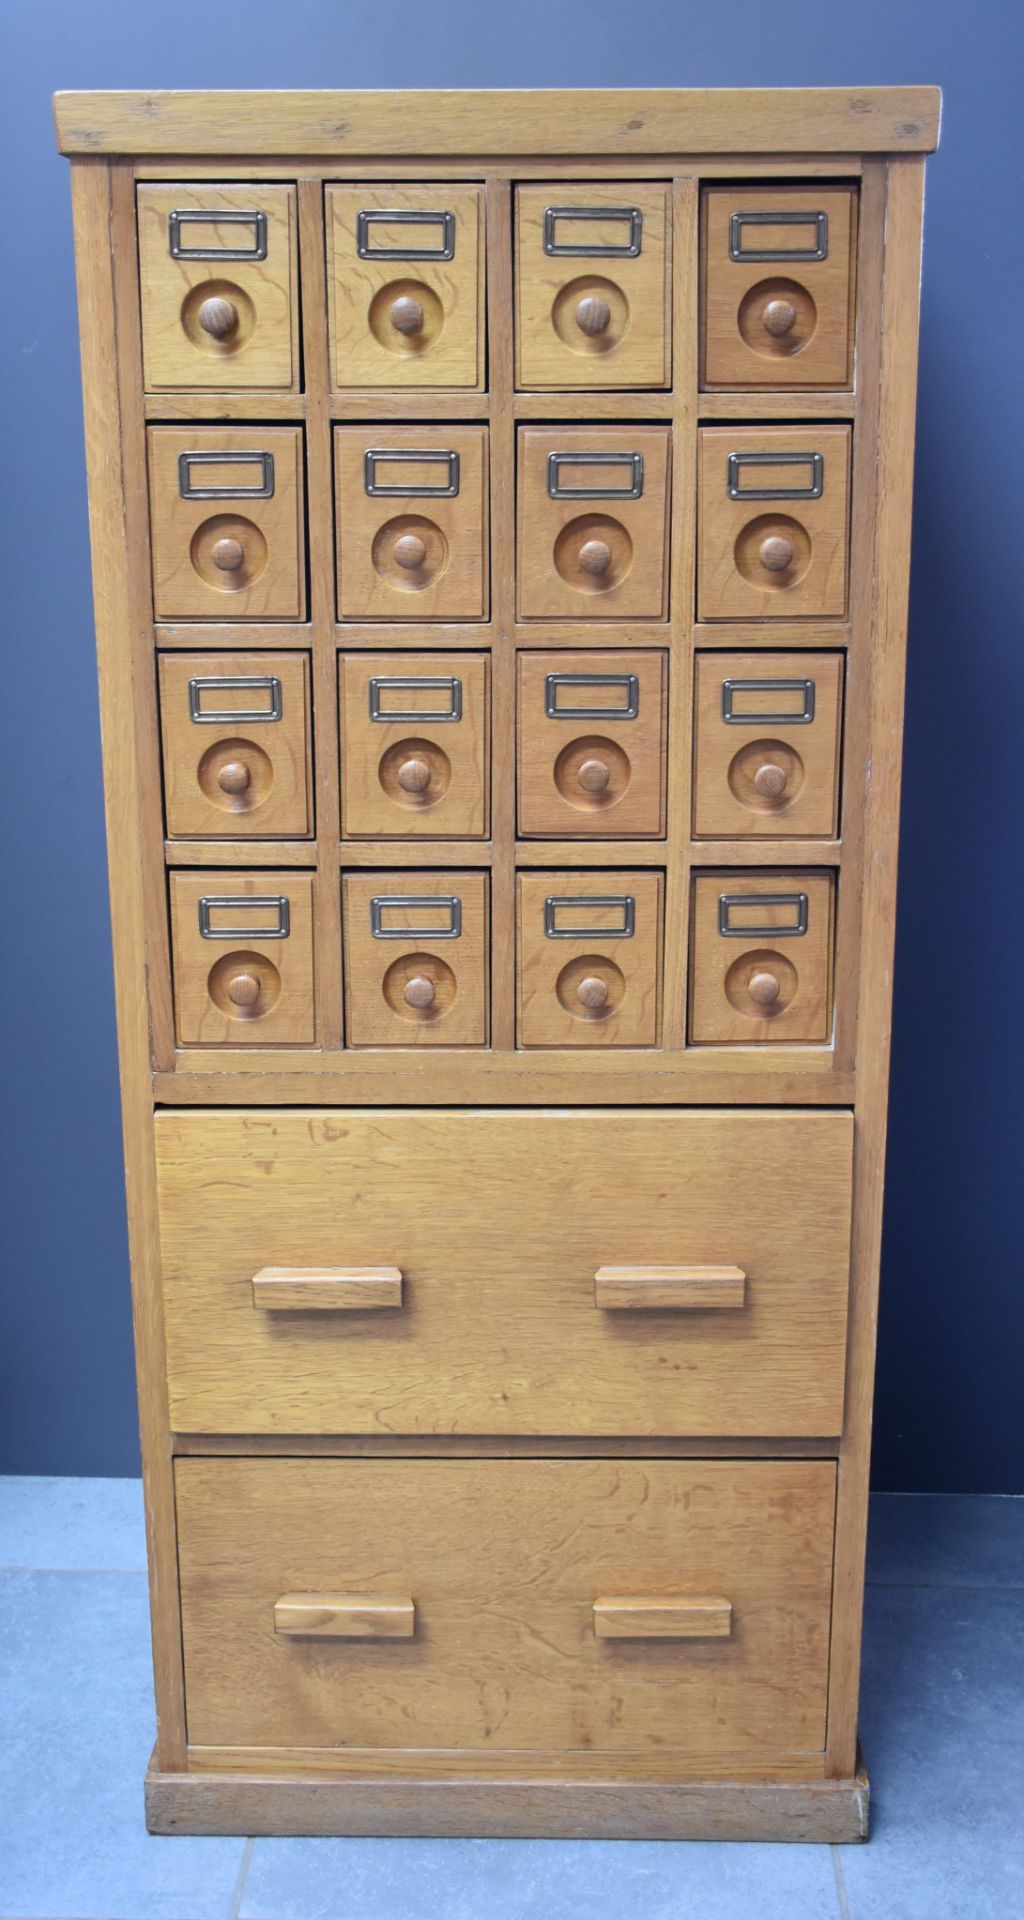 Oak administration cabinet circa 1940 opening on 16 small square drawers. Height : 130 cm.